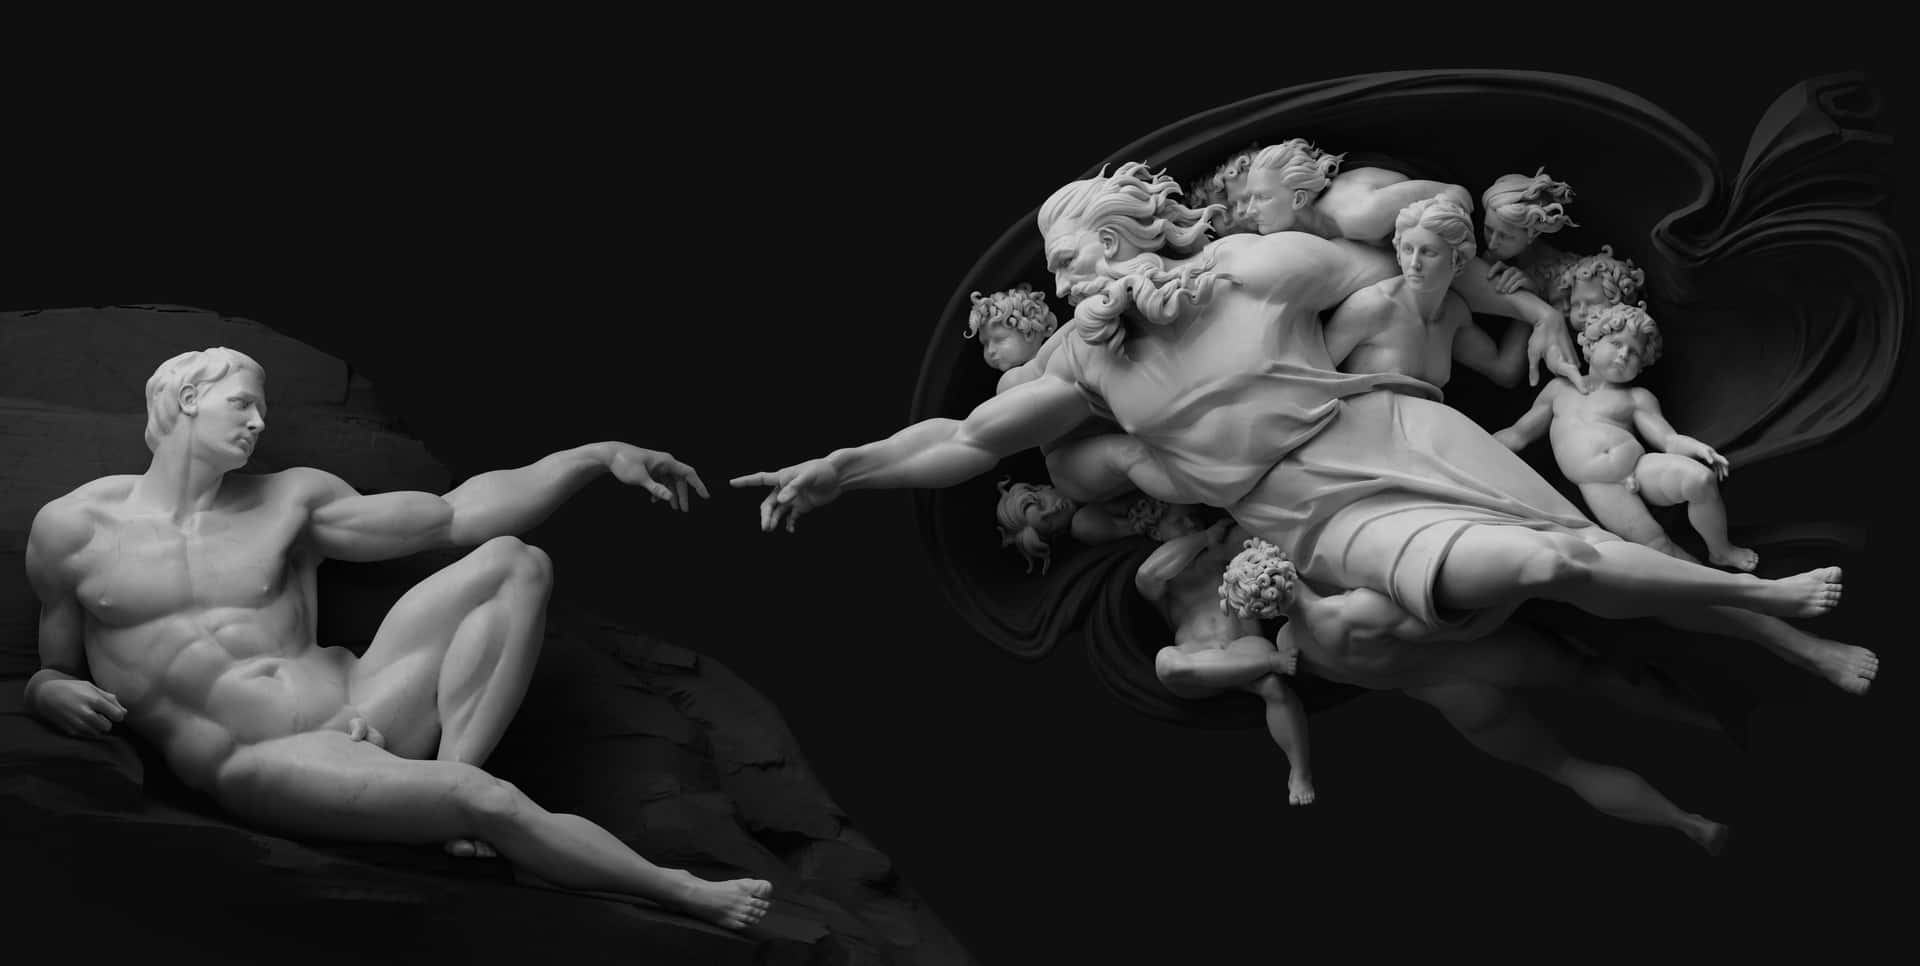 The creation of Adam, the biblical story of Adam and Eve, the first man and woman, in a surreal and dark version - The Creation of Adam